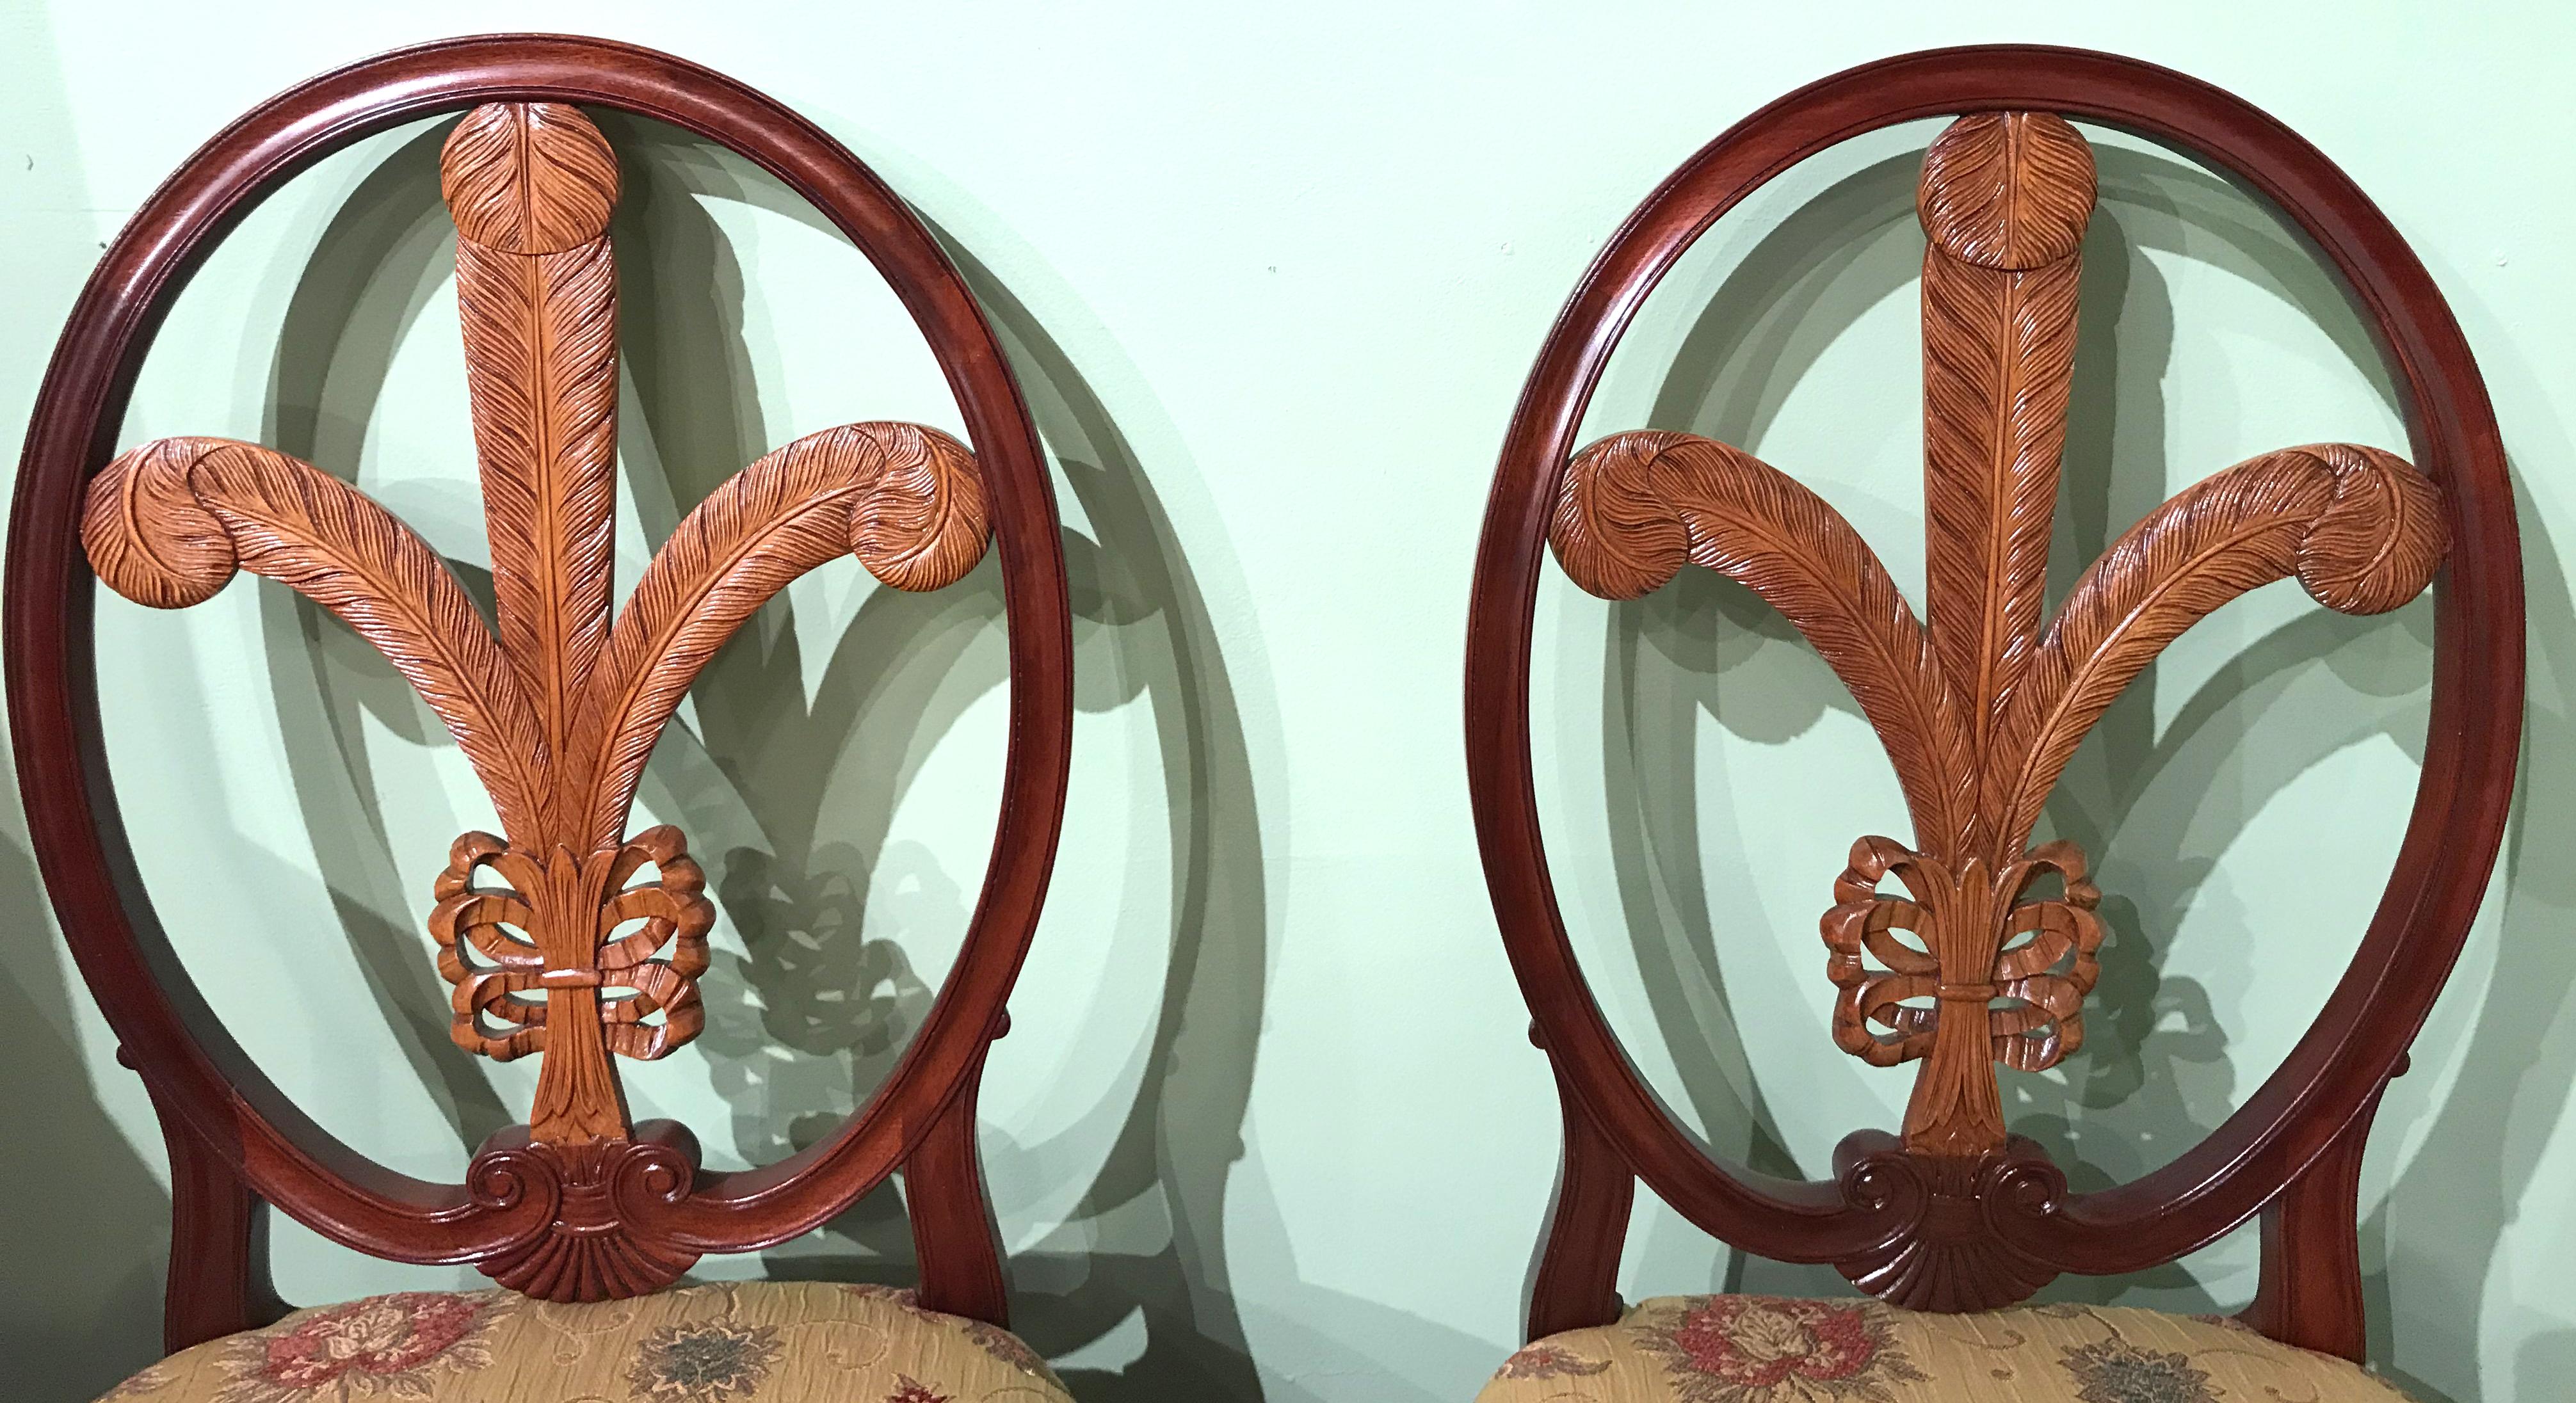 A beautiful pair of mahogany side chairs with maple carved Prince of Wales feather backs, finely reupholstered with complimenting foliate material. A quality set by Boston furniture maker Joseph Gerte, circa 1940s. Very good to excellent overall